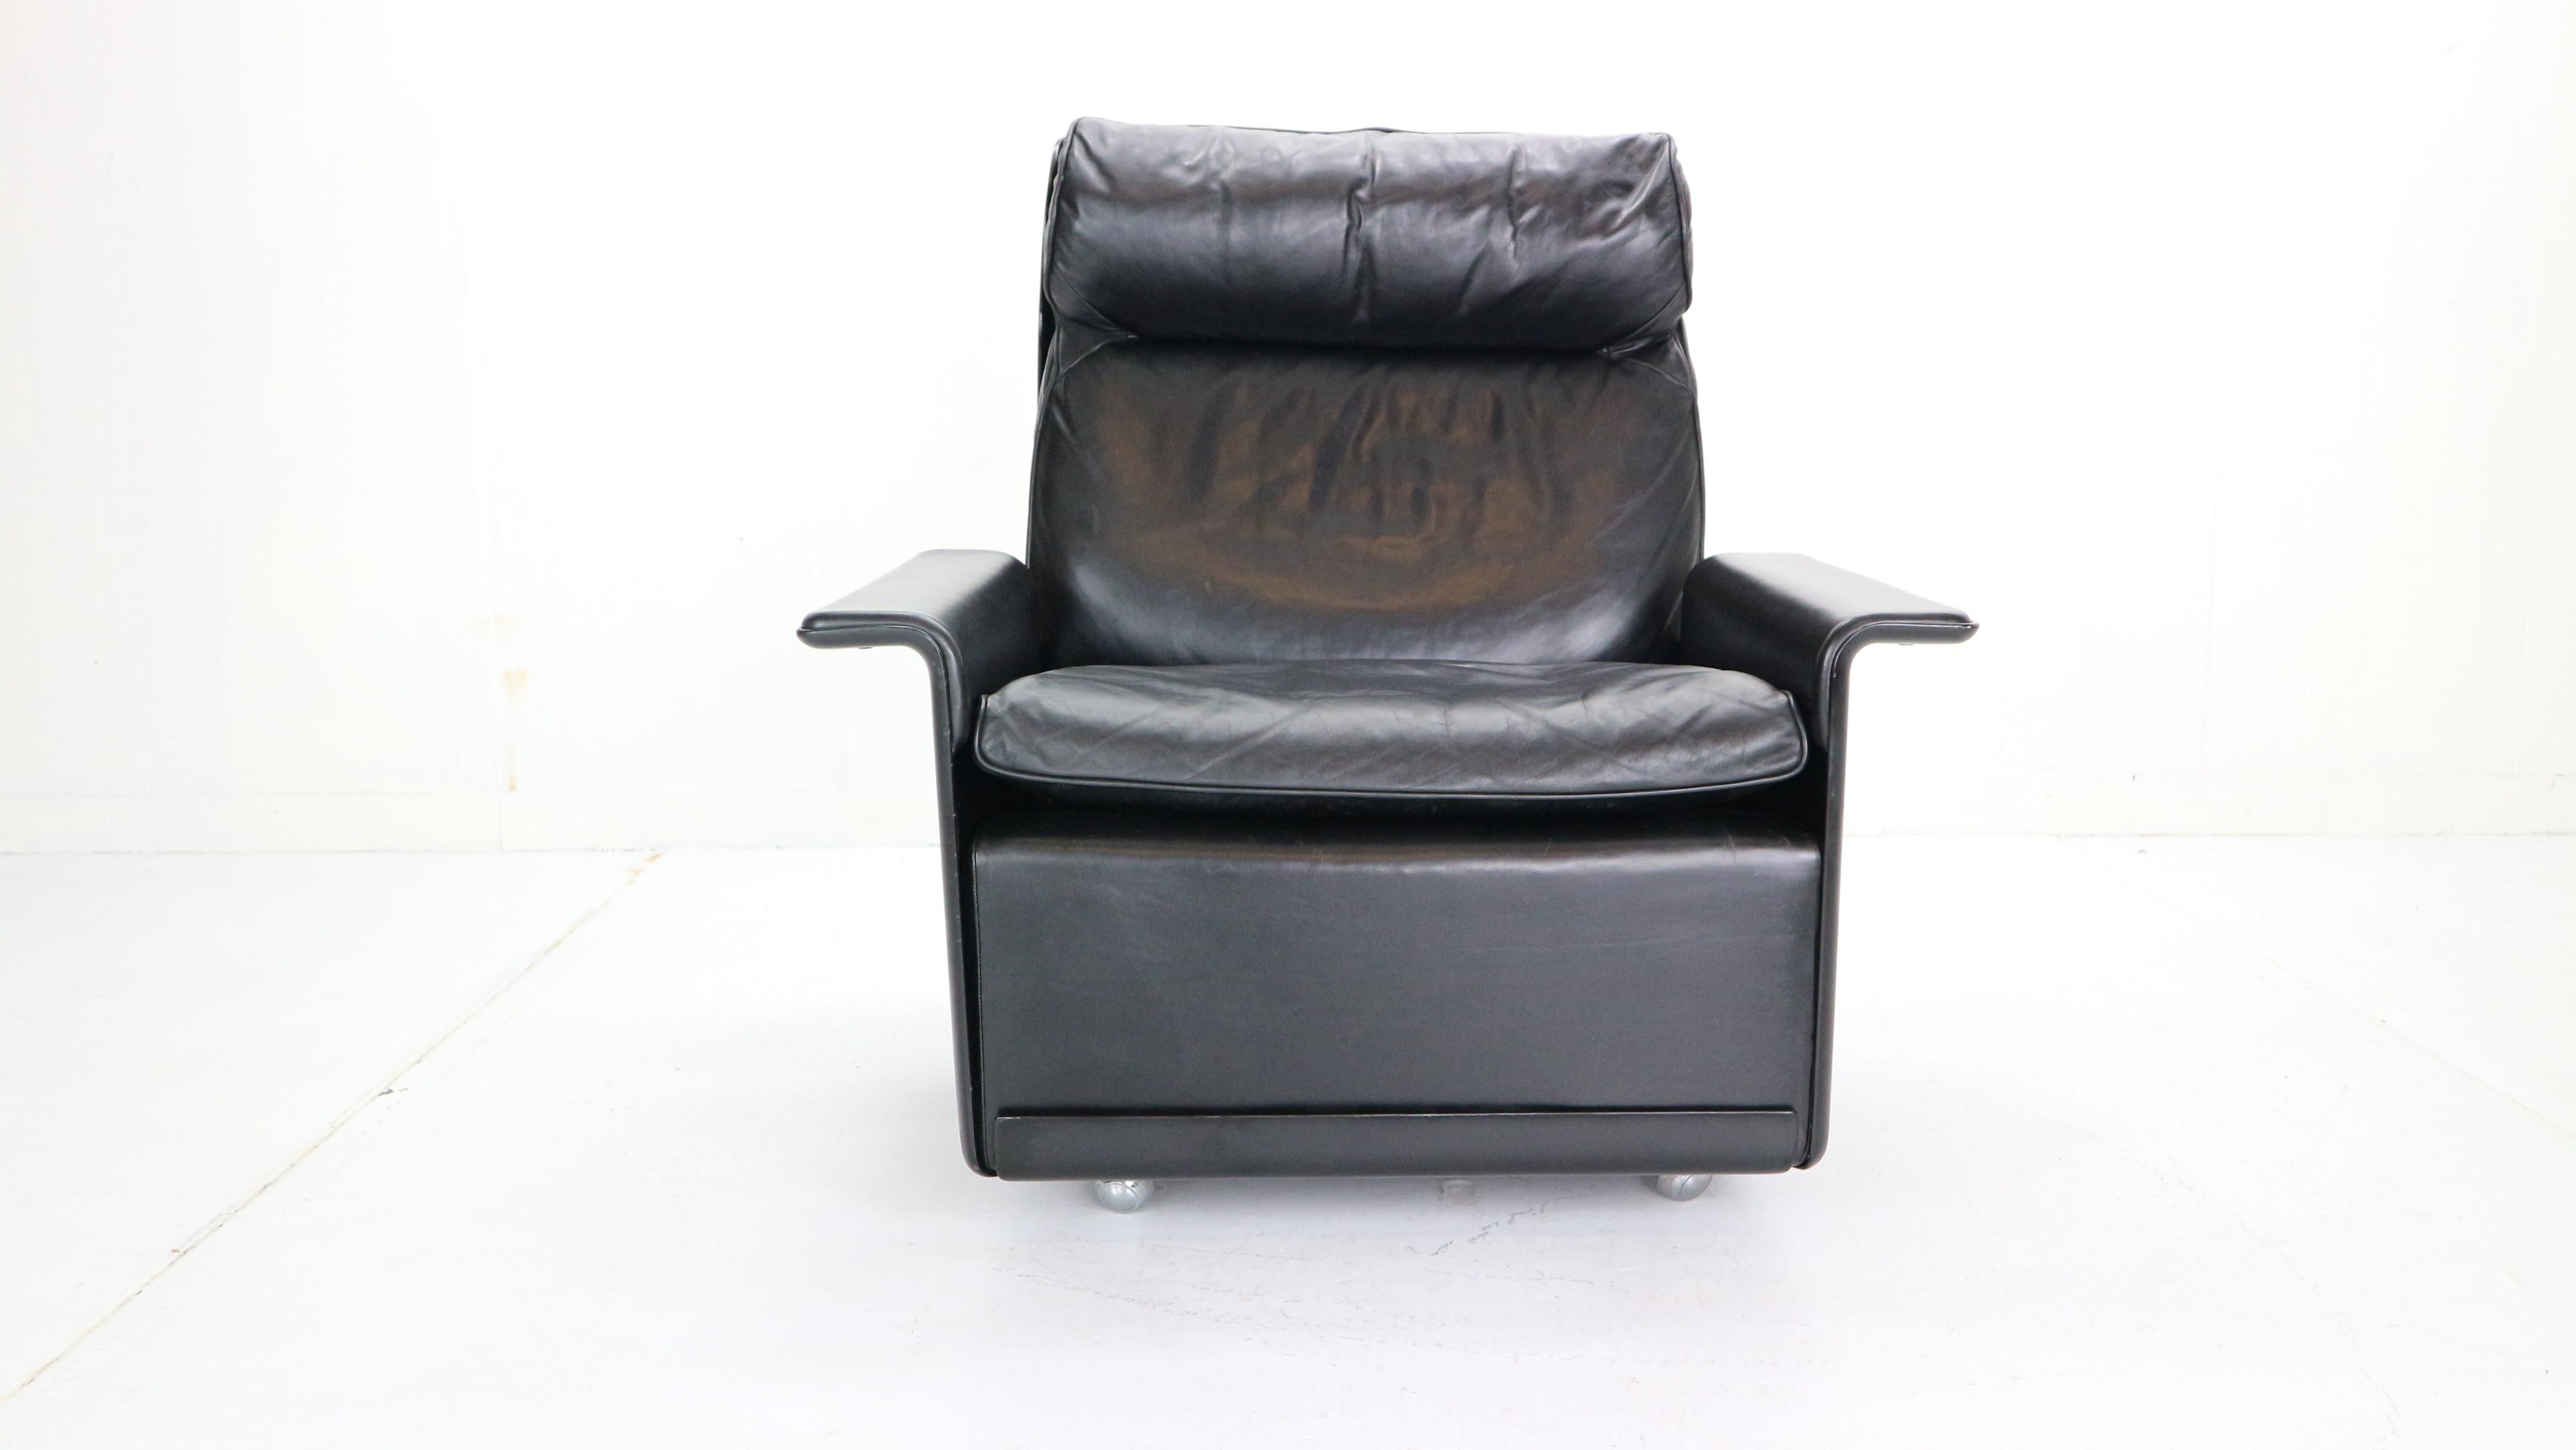 Black leather lounge chair designed by Dieter Rams back in 1962 for German manufacturer Vitsœ.
Model-620.
High-back armchair features swivel legs, black leather upholstery and fiberglass back & armrests. Excellent seating comfort.
 
   